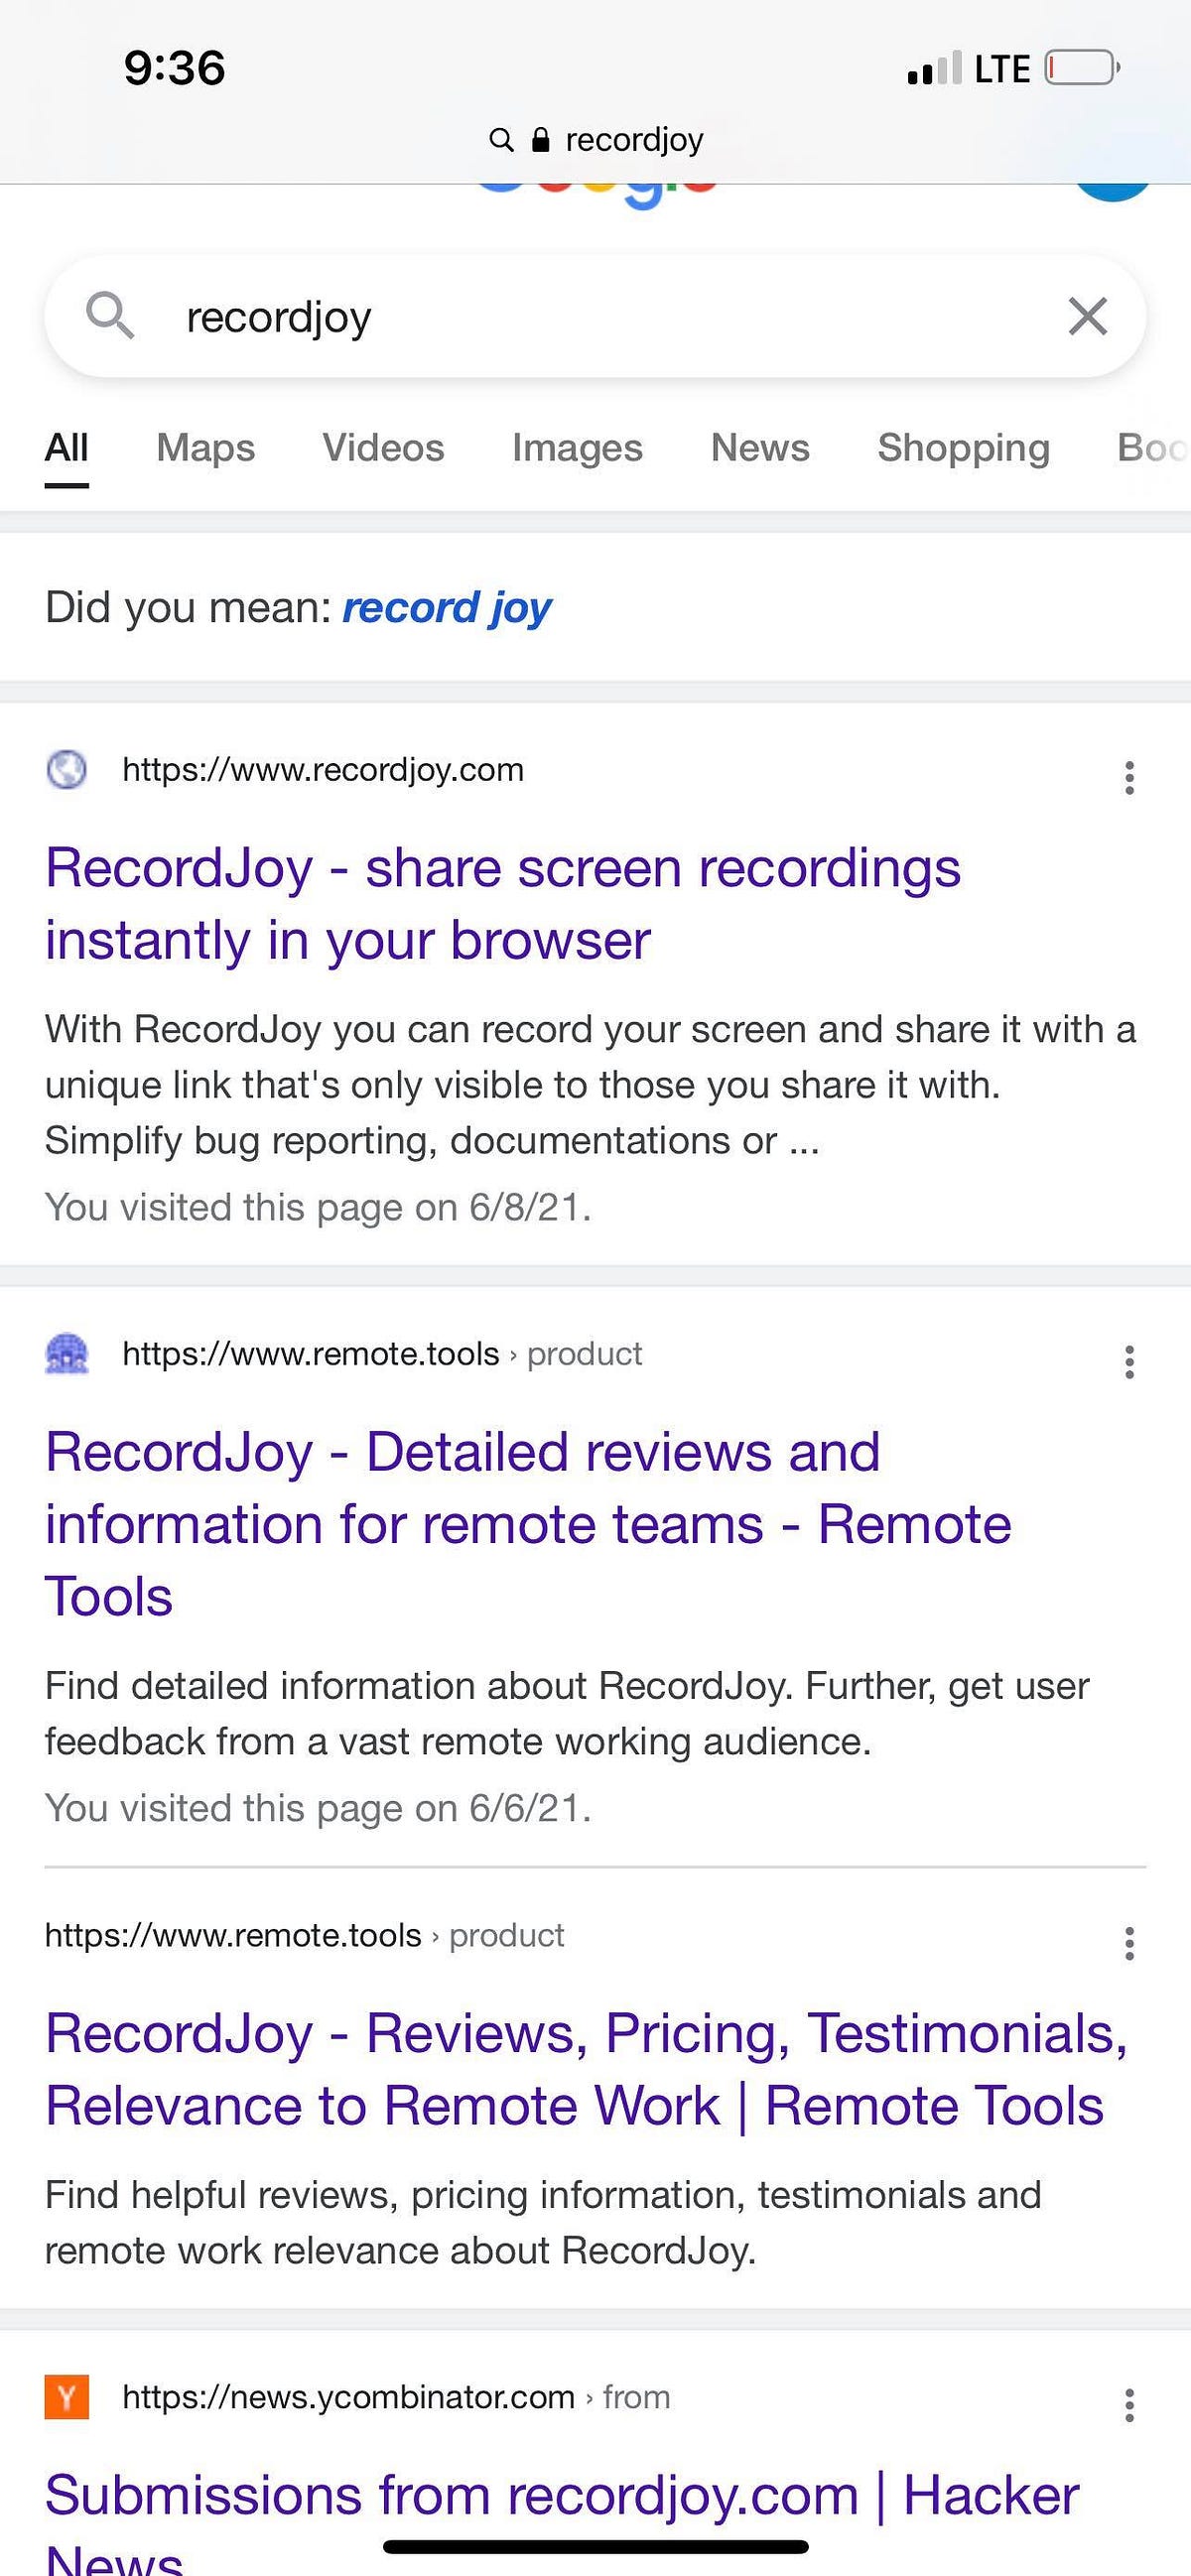 Last week I decided to focus on SEO for my side project RecordJoy (www.recordjoy.com). To add some context, RecordJoy is a browser tool that allows yo